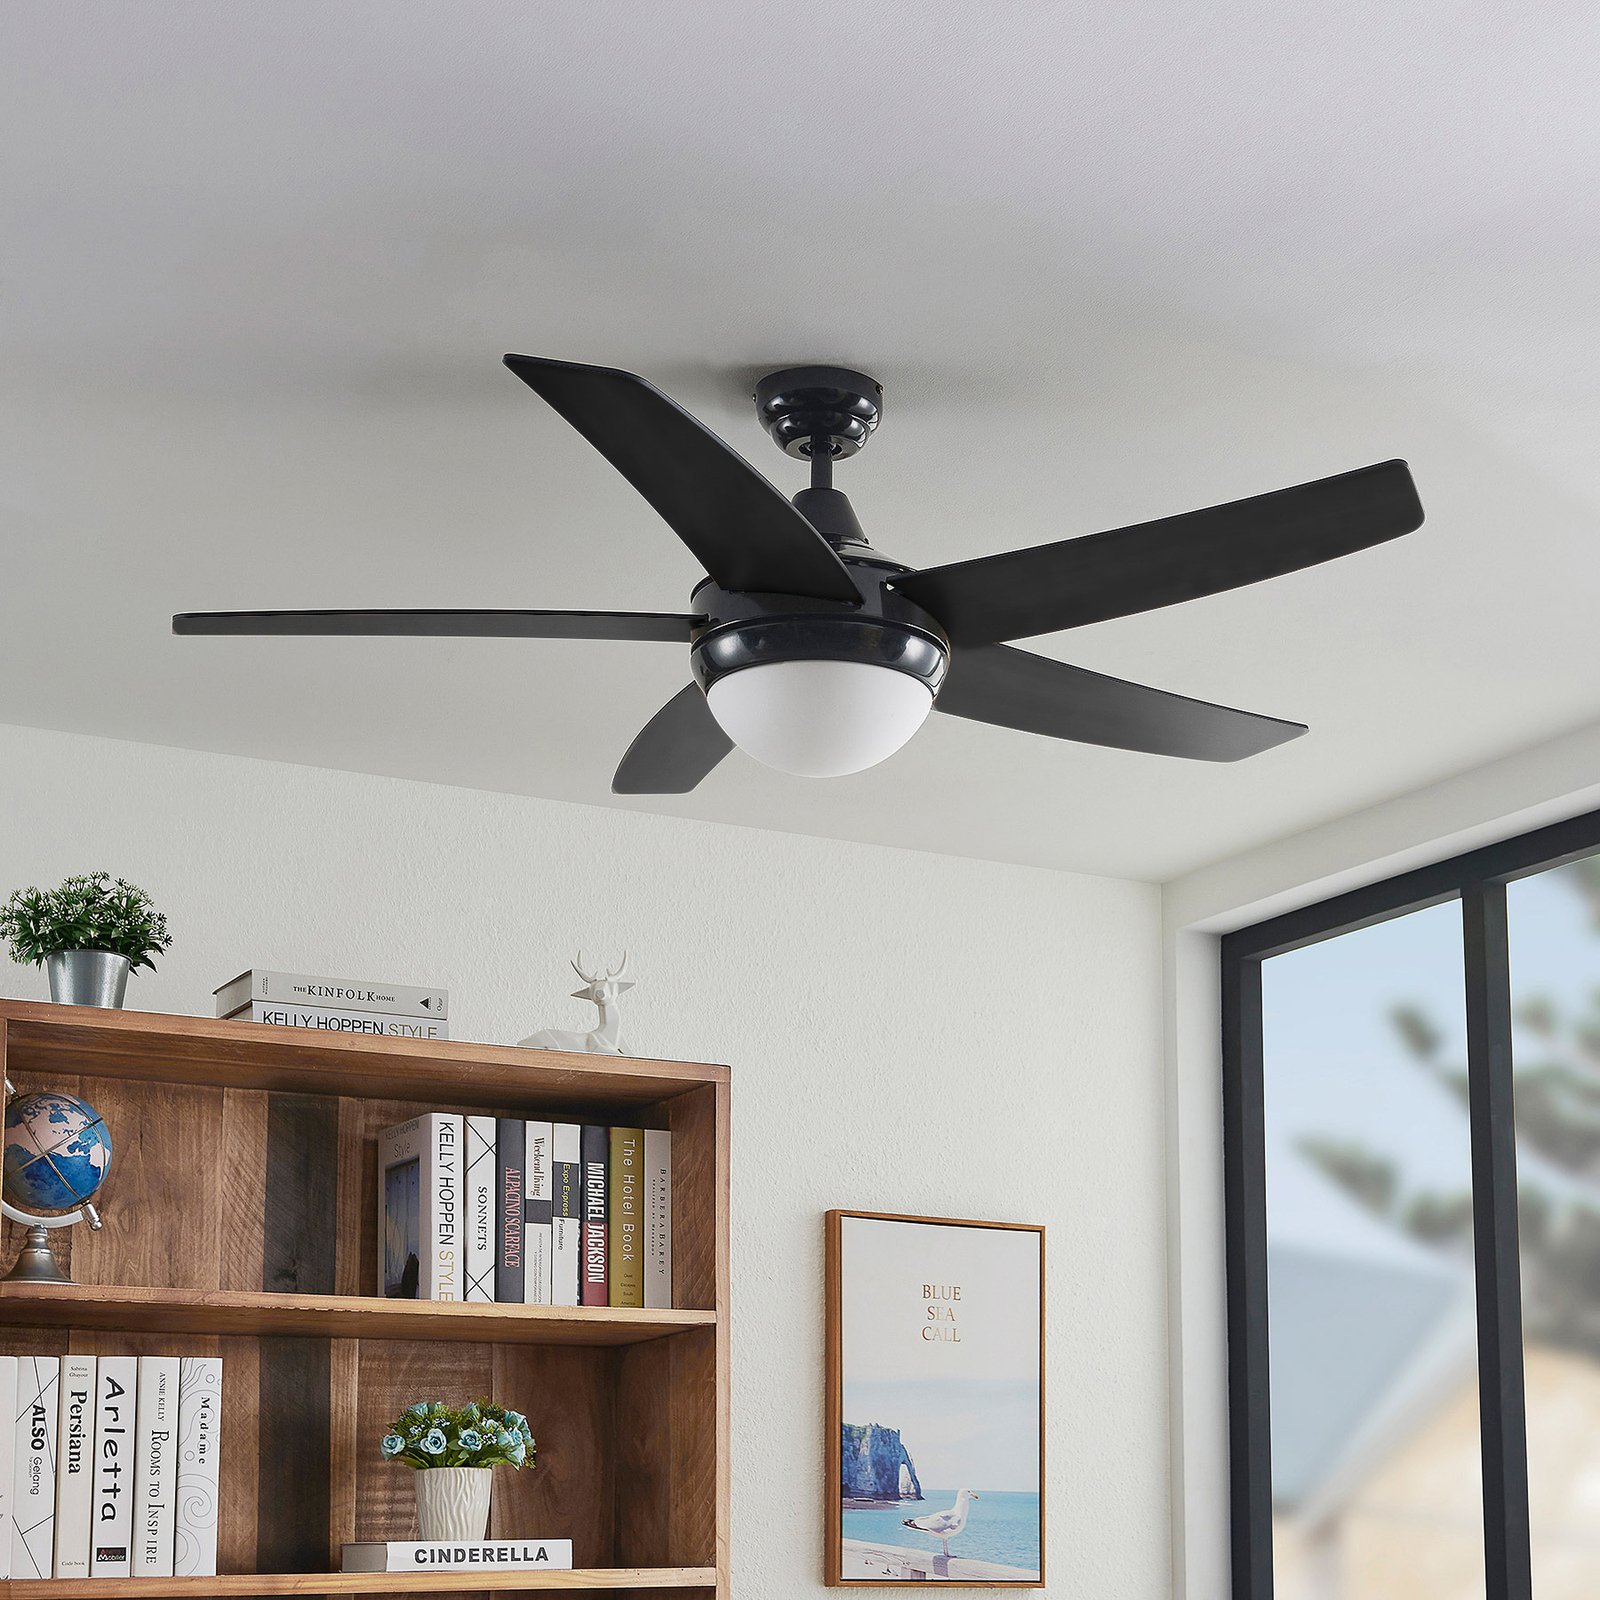 Lindby ceiling fan with light Auraya, quiet, black